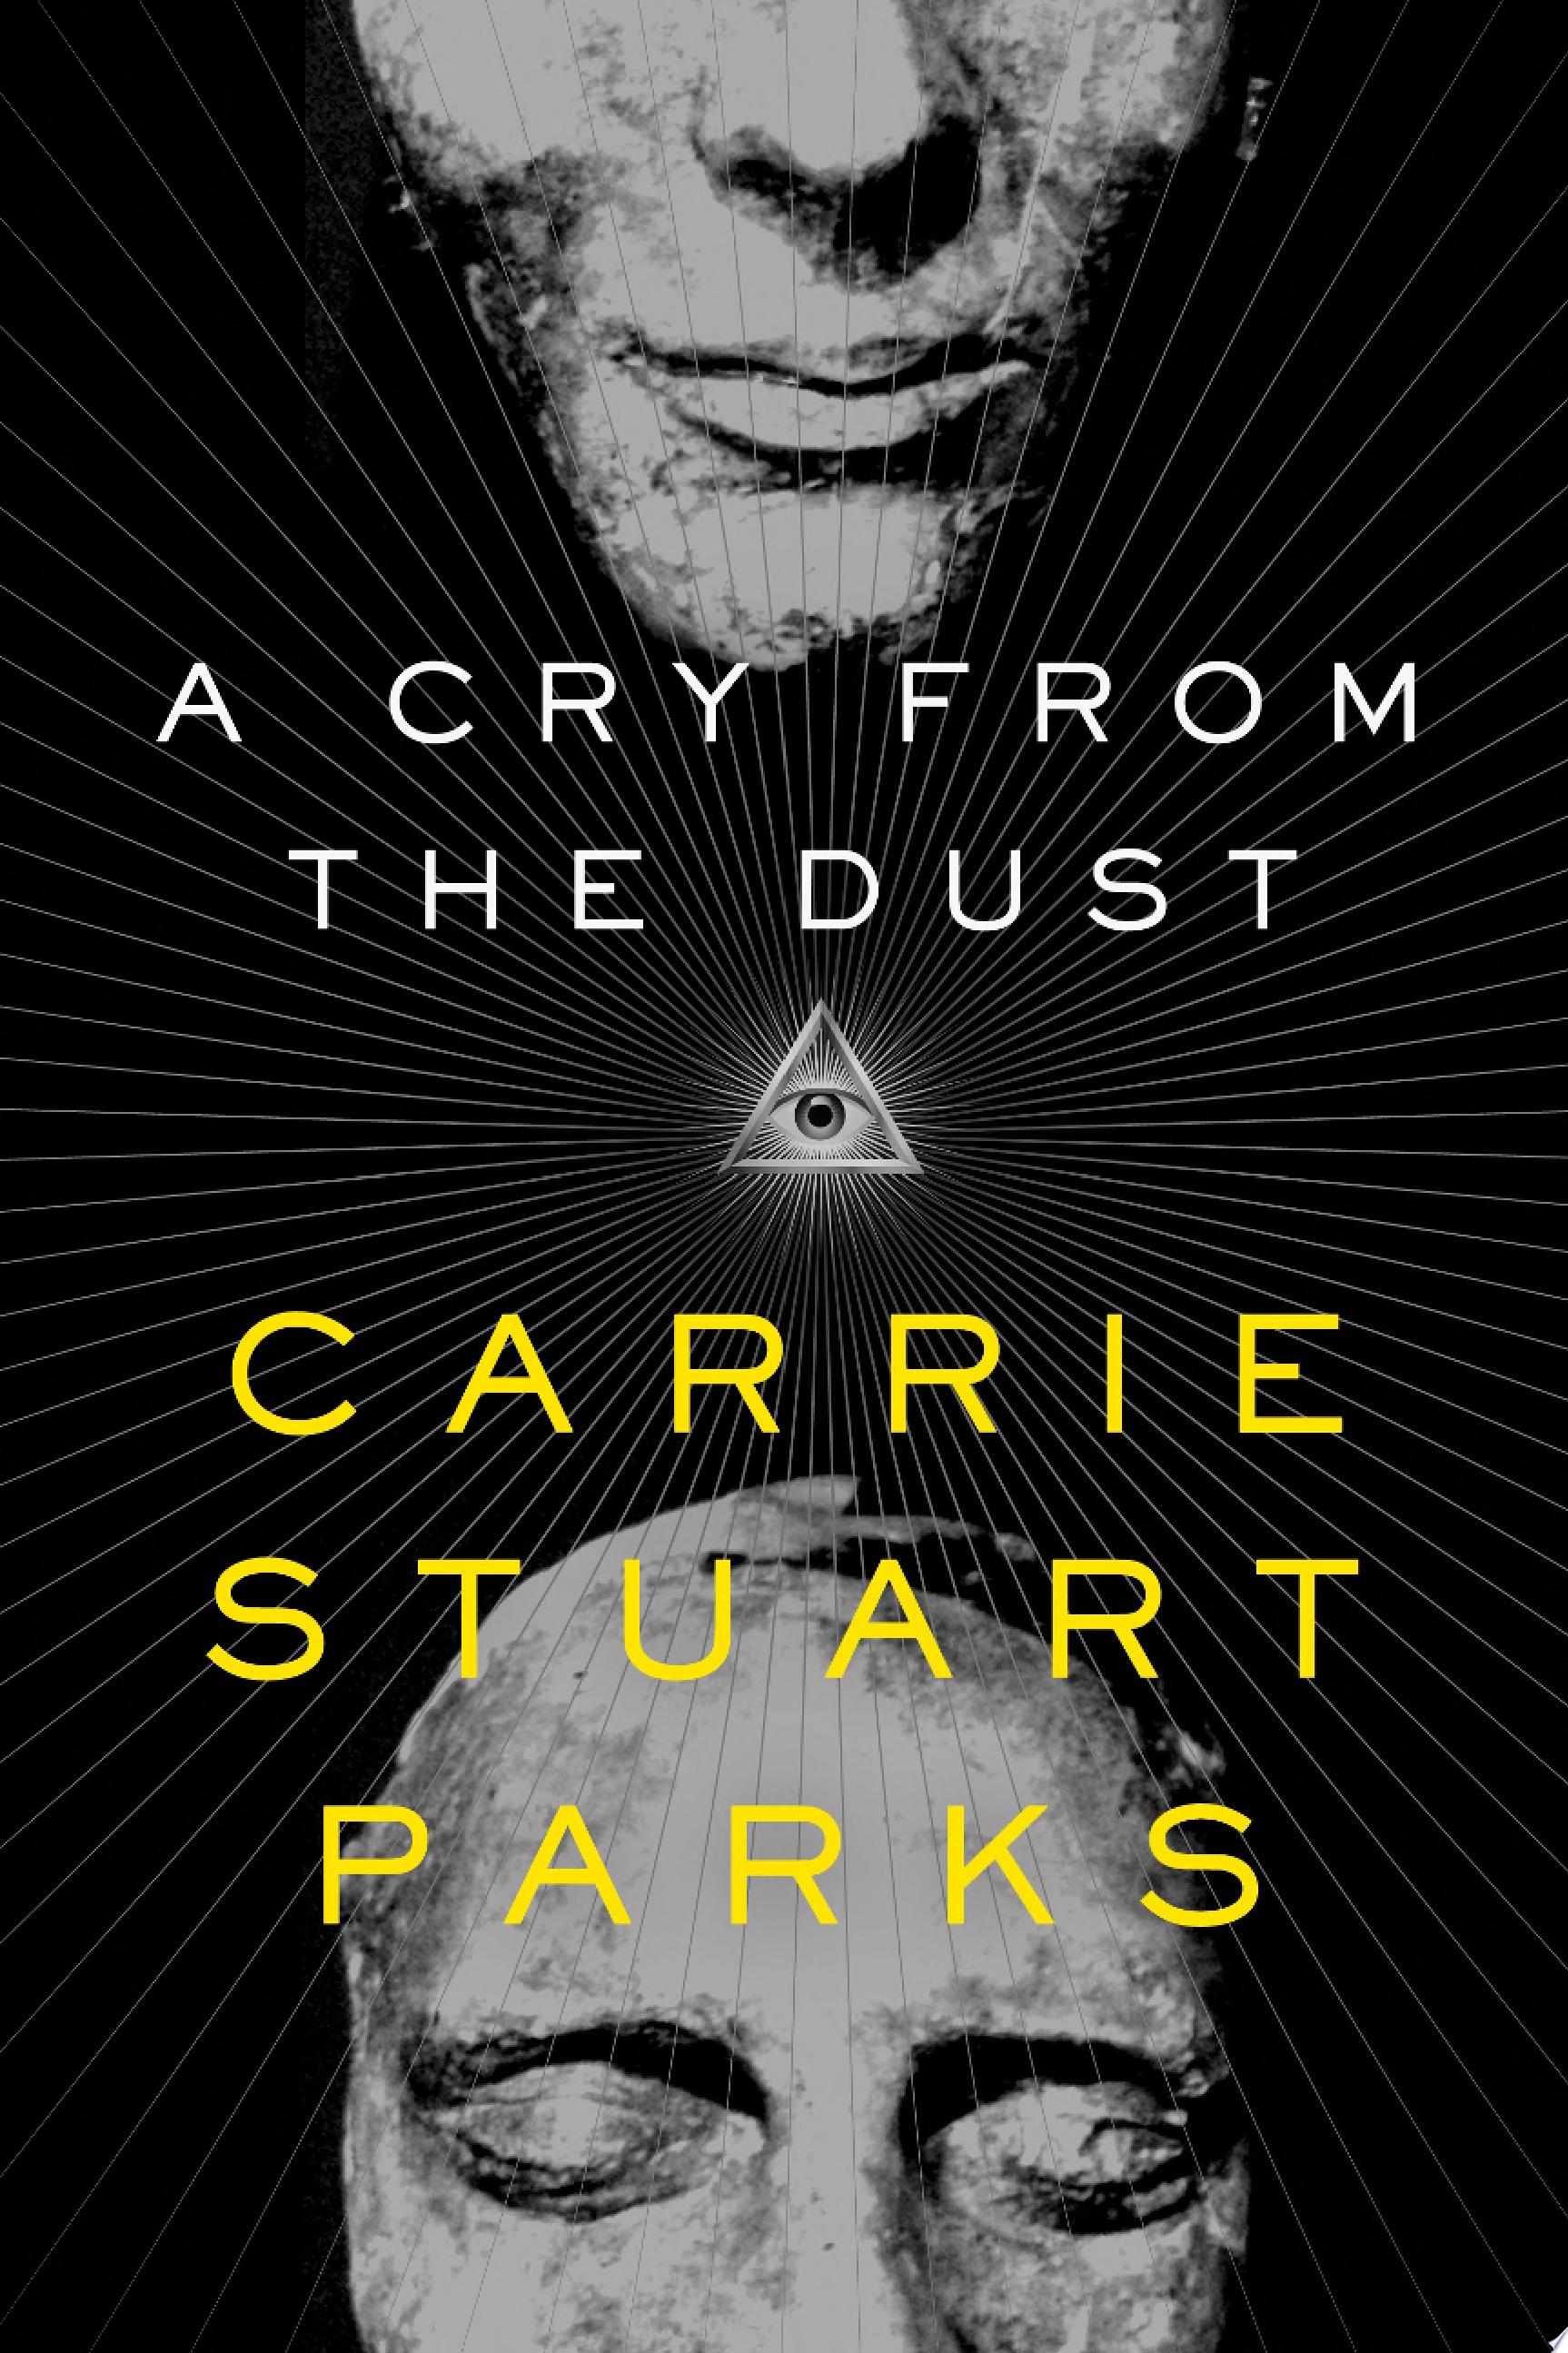 Image for "A Cry from the Dust"